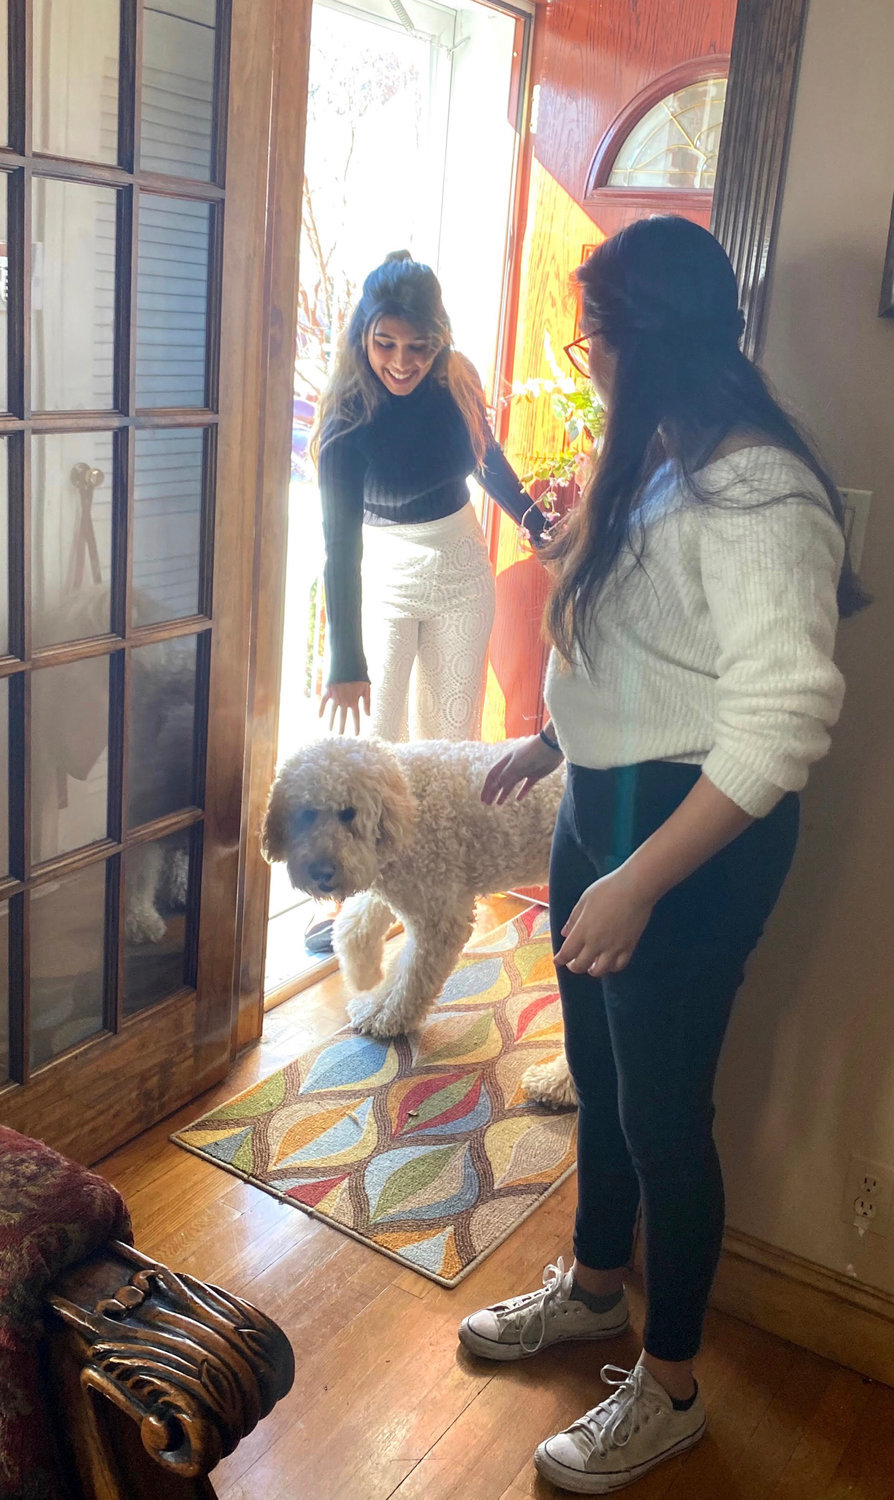 Recent South High School graduate Abigail Arjune, left, with her sister, Sarah, and their goldendoodle, Orion. The sisters have been walking together more as they develop new routines while staying at home.